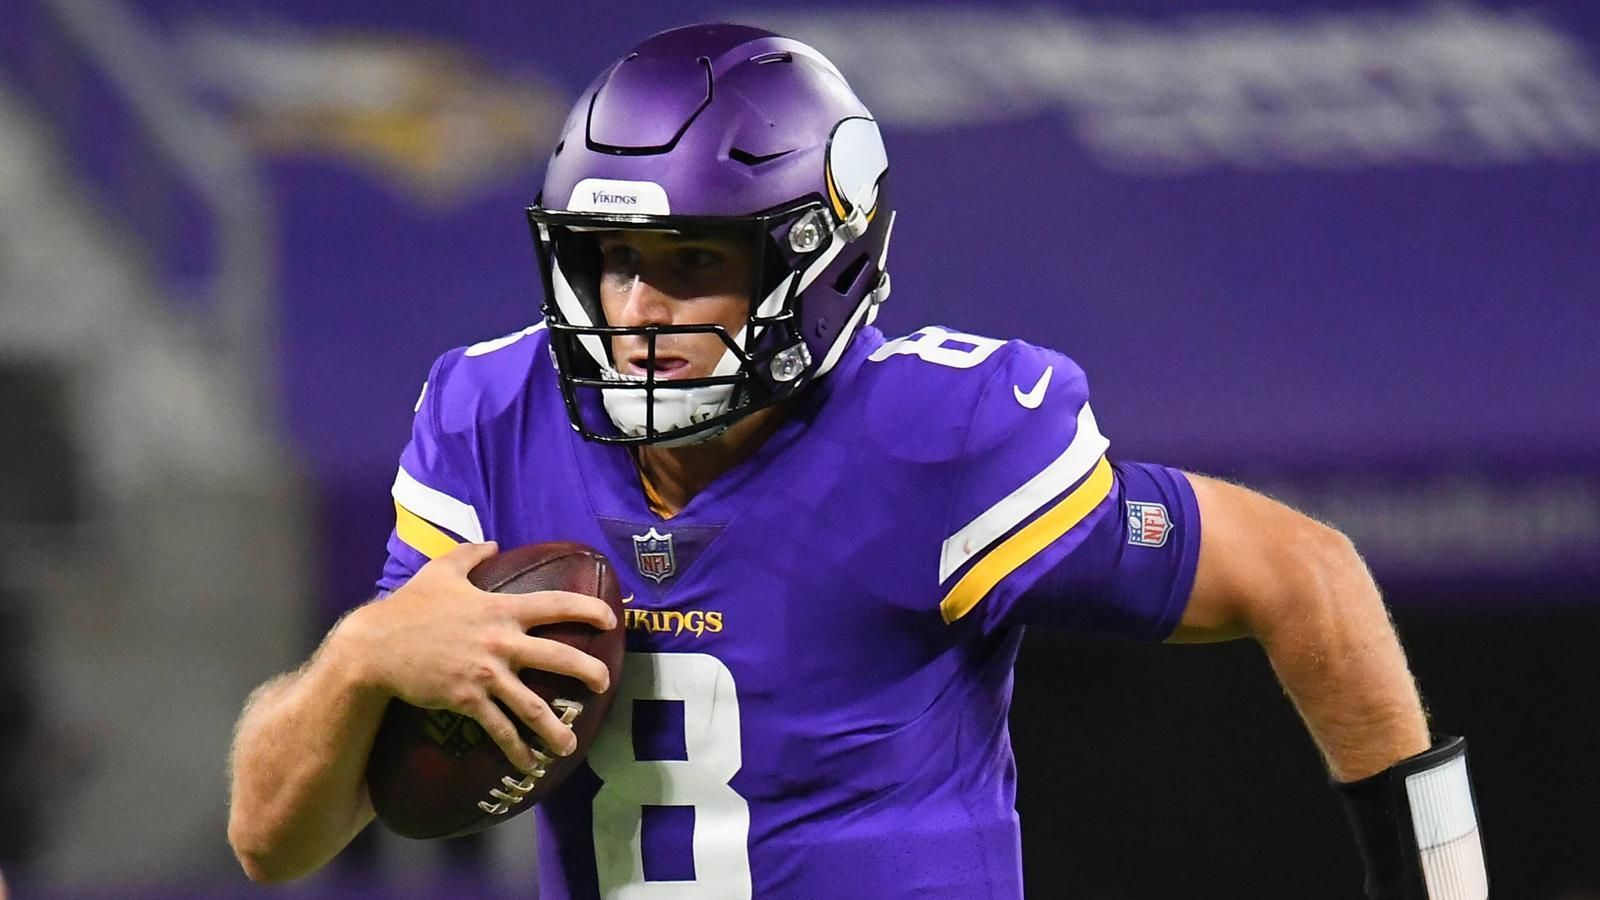 
                <strong>Minnesota Vikings</strong><br>
                Kirk Cousins (Quarterback)Riley Reiff (Offensive Tackle) Kyle Rudolph (Tight End)Everson Griffen (Defensive End)Linval Joseph (Defensive Tackle)Anthony Barr (Linebacker)
              